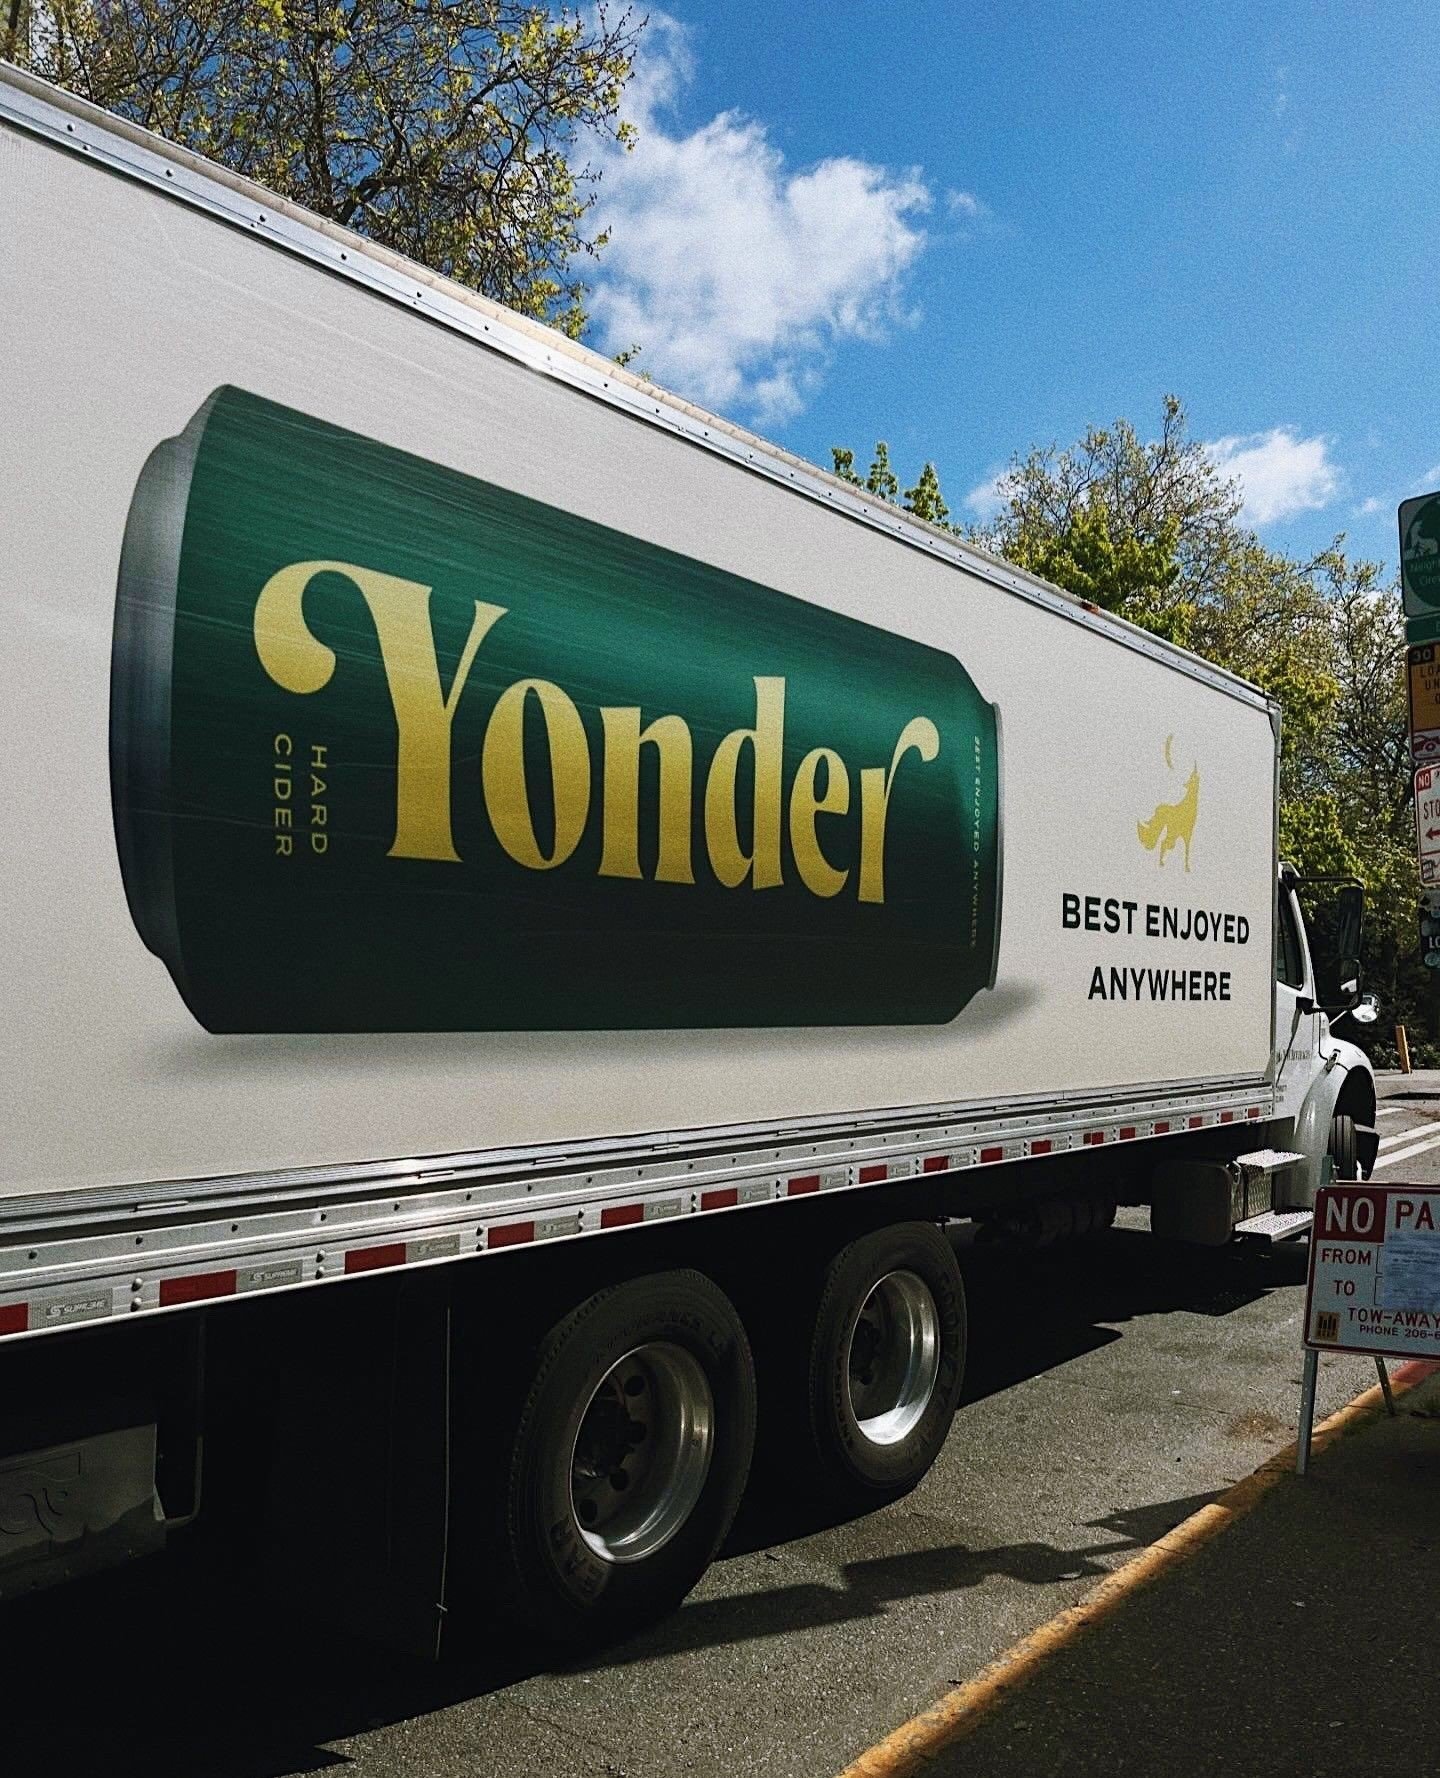 Have you seen our cider on the move with this incredible truck? Ensuring you can enjoy it anywhere, anytime - no matter where you may roam. 🗺️ ⁠
⁠
⁠
📷: @marykorlindowns